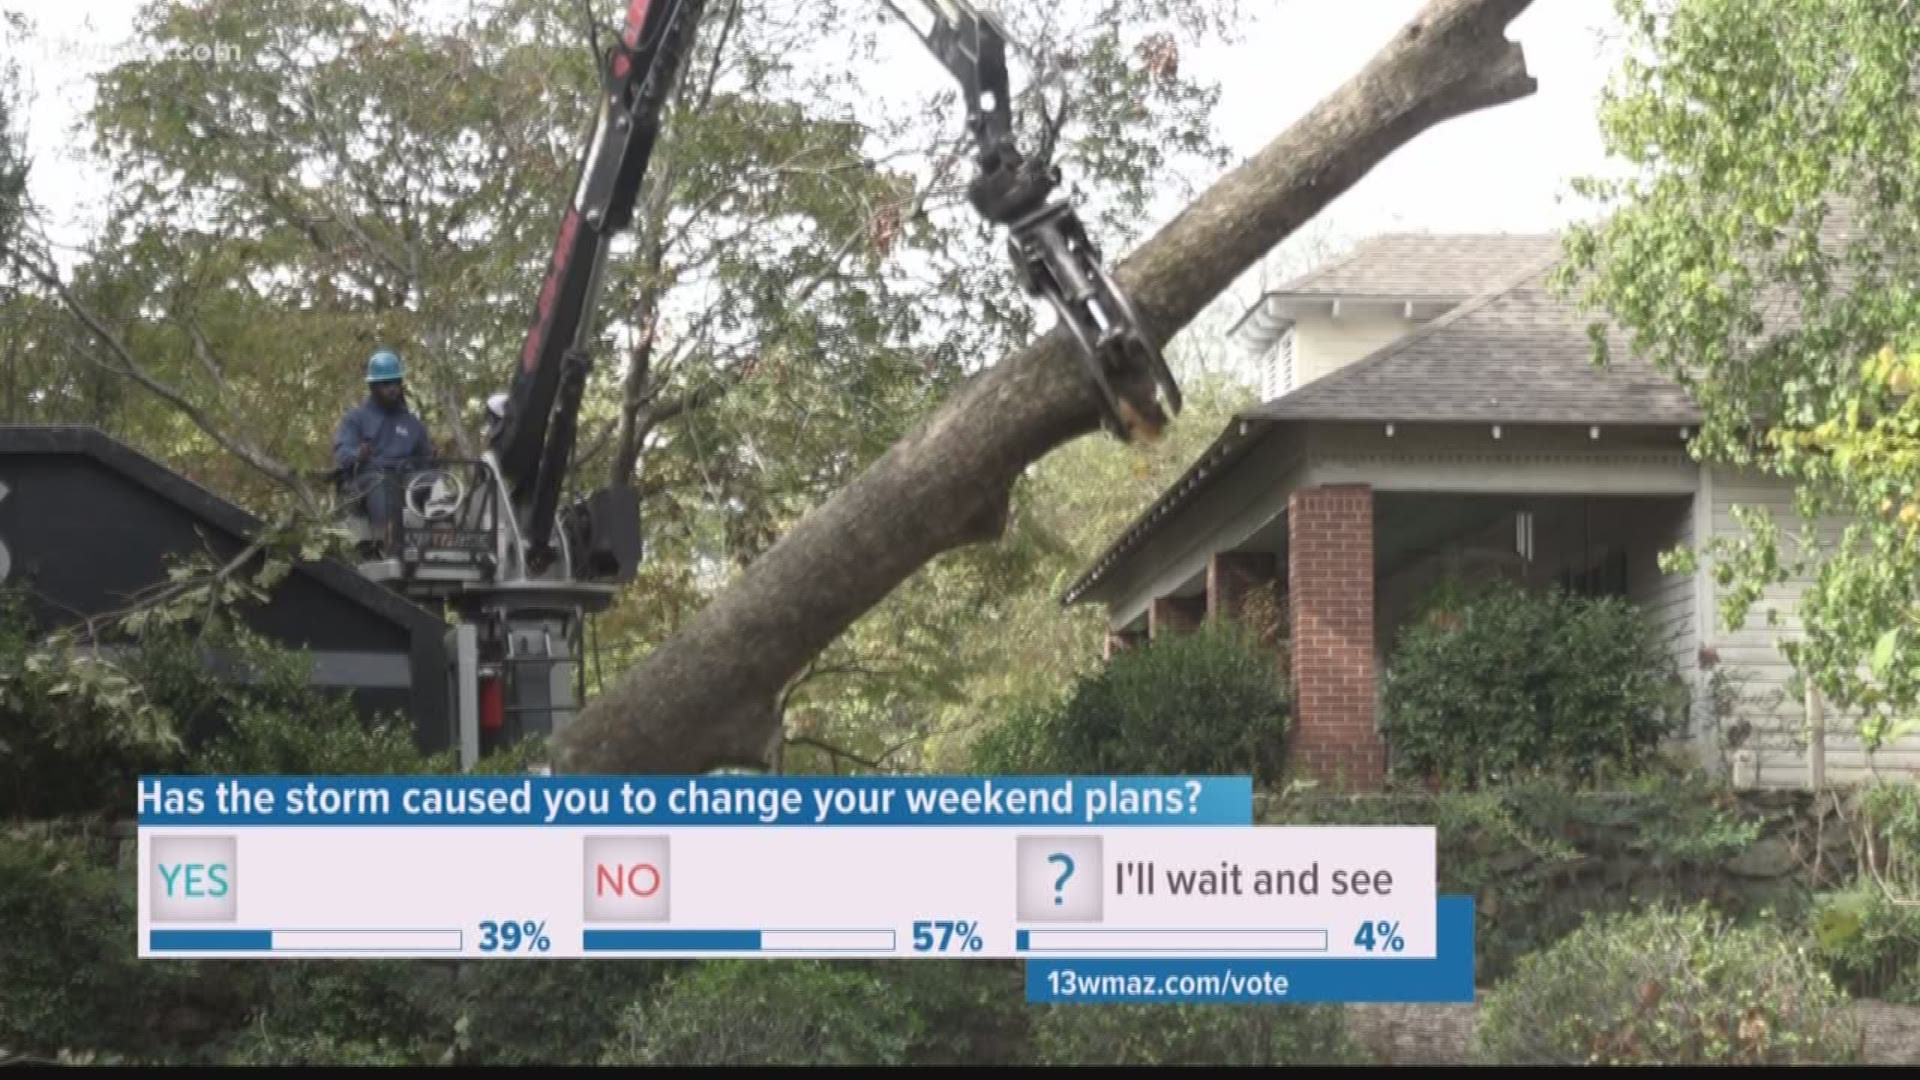 After this summer's drought, rain and heavy winds are expected this weekend. These are perfect conditions for trees to uproot.